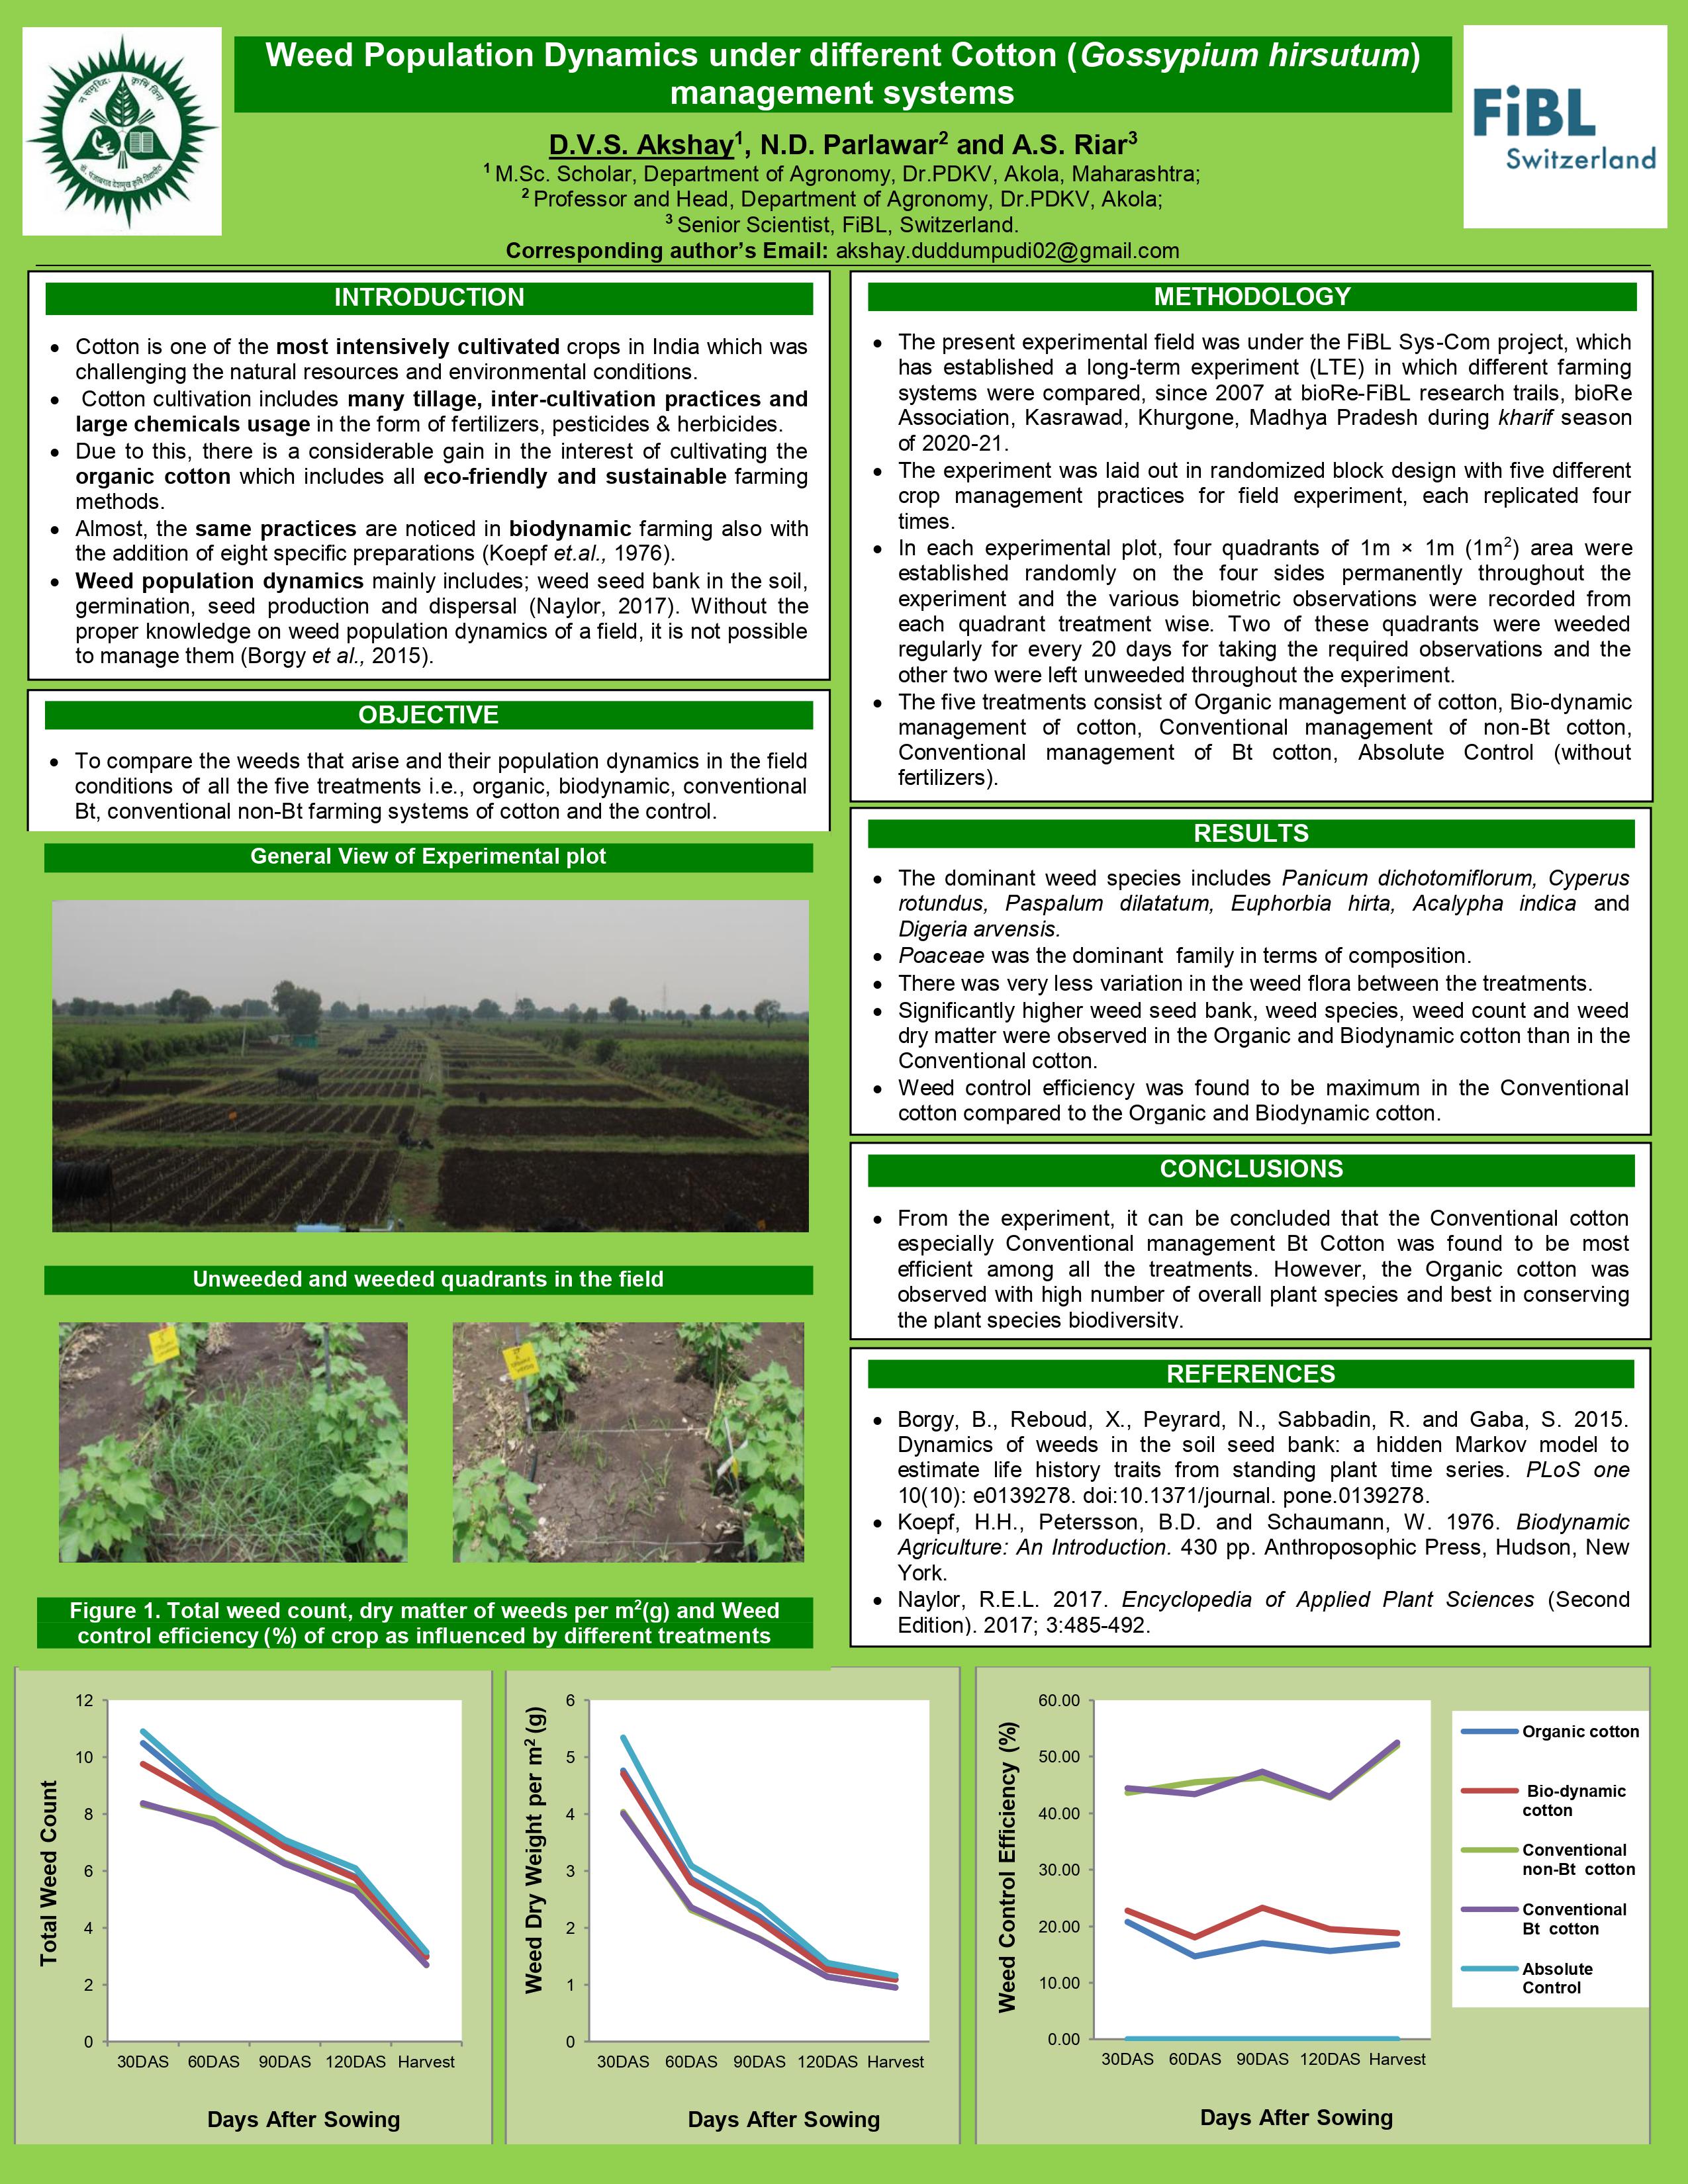 Weed Population Dynamics Under Different Cotton  Management Systems